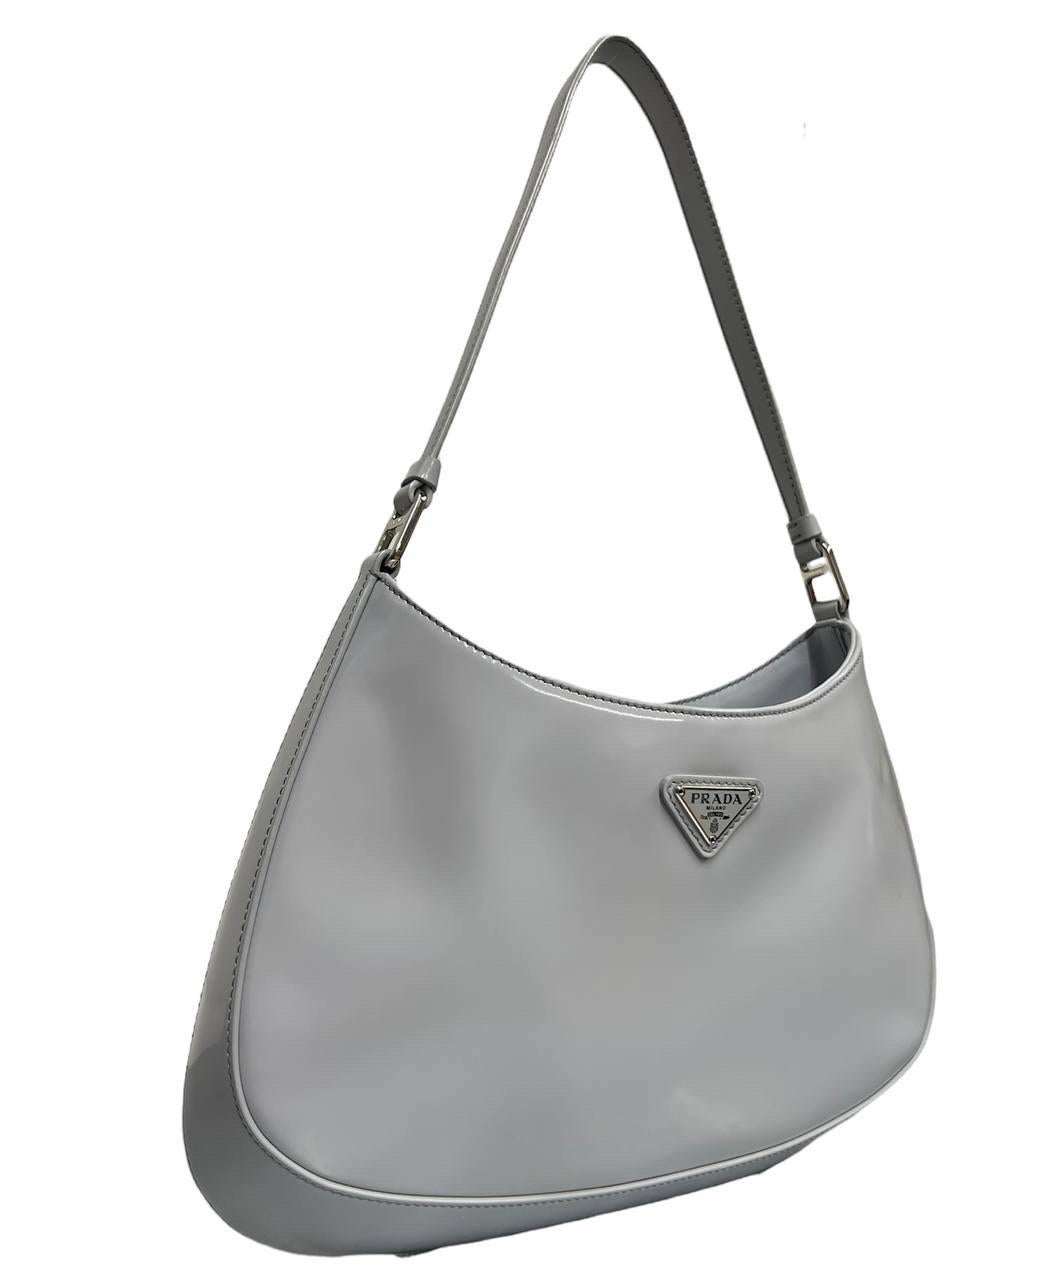 Shoulder bag by Prada model Cleo, representing an iconic design reinterpreted by the brand of the 90s, in Cornflower-colored brushed leather with silver hardware.

It has a button closure. The interior is lined with a soft black fabric and is